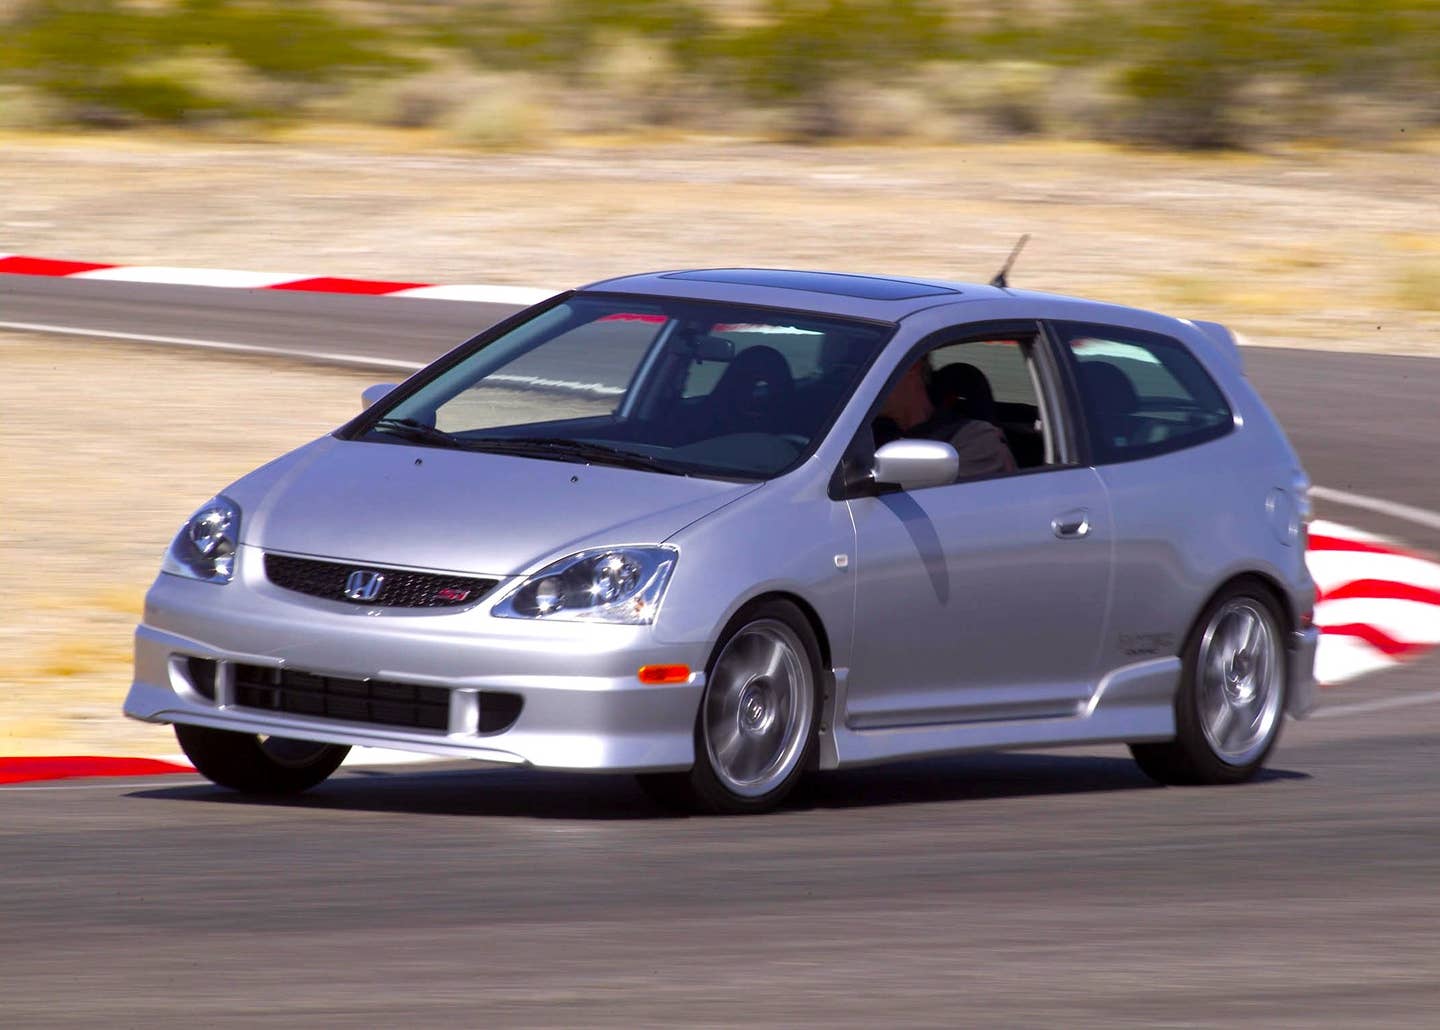 The 2002-2005 EP3 Honda Civic Si Doesn’t Deserve the Hate It Gets